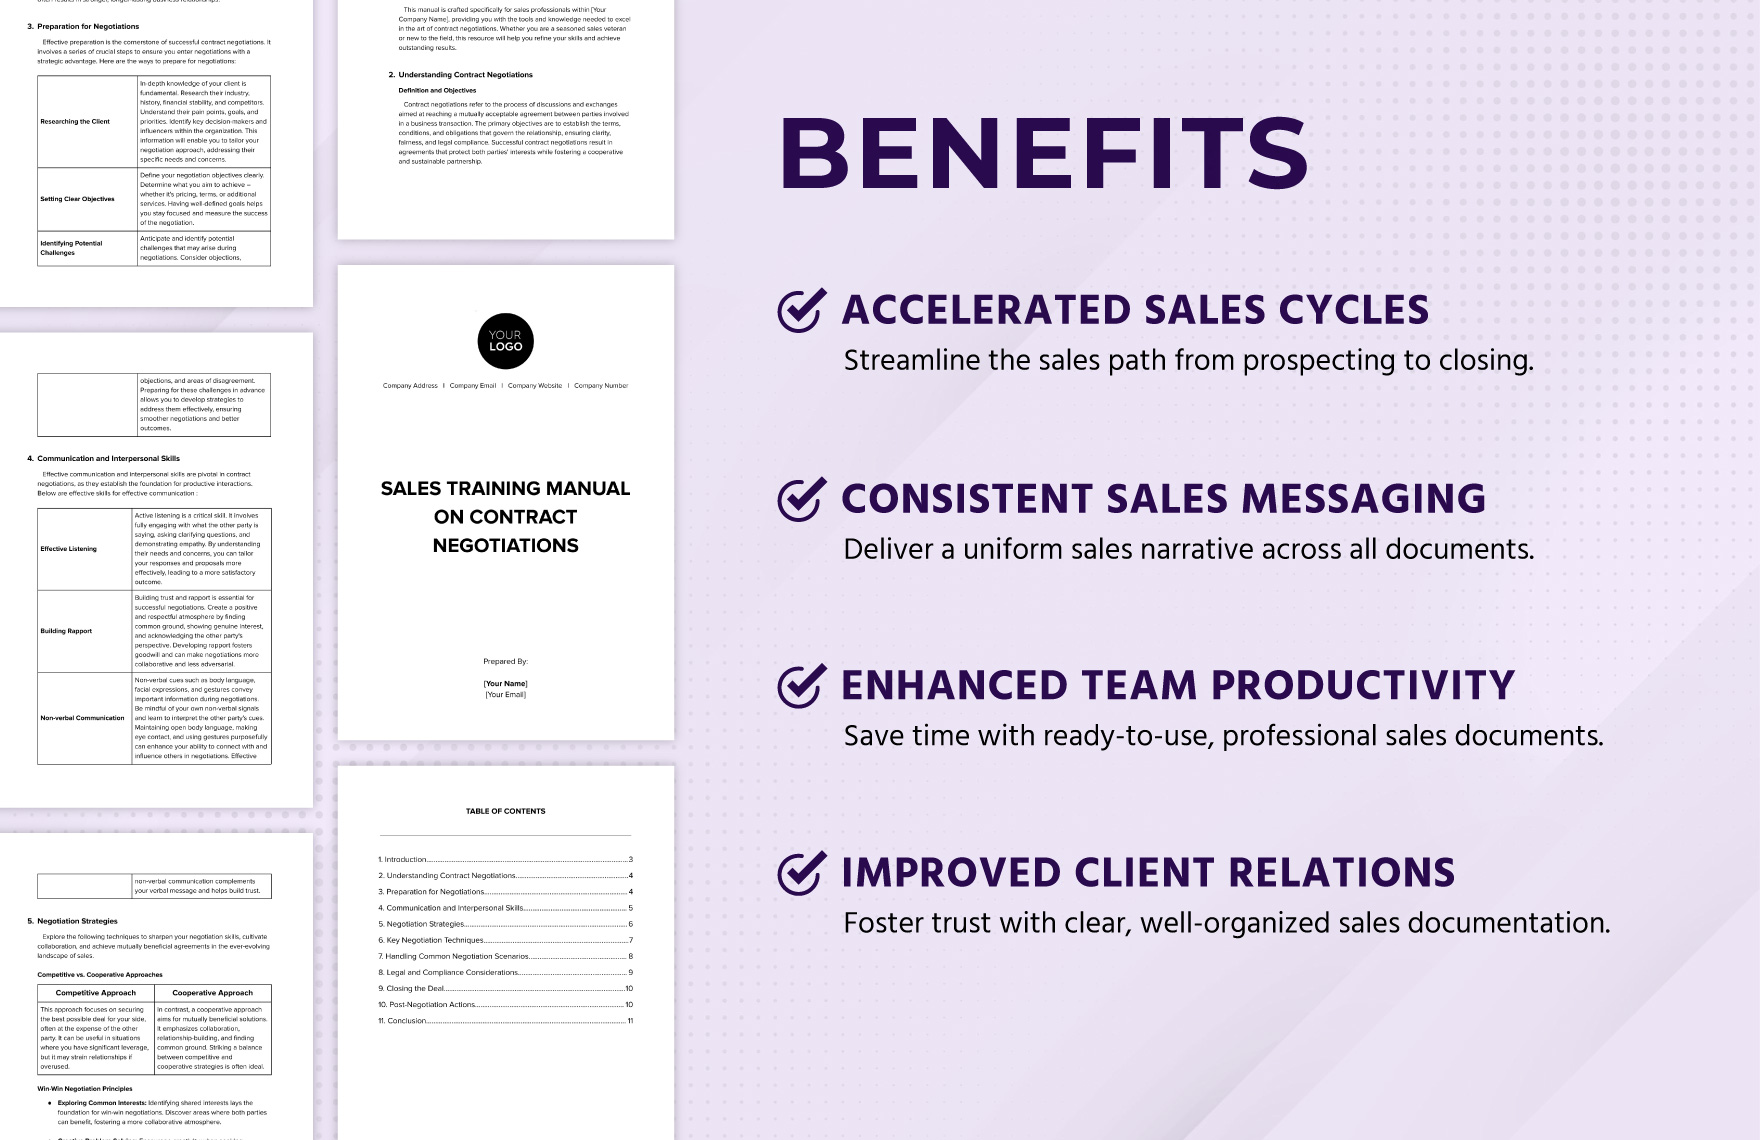 Sales Training Manual on Contract Negotiations Template